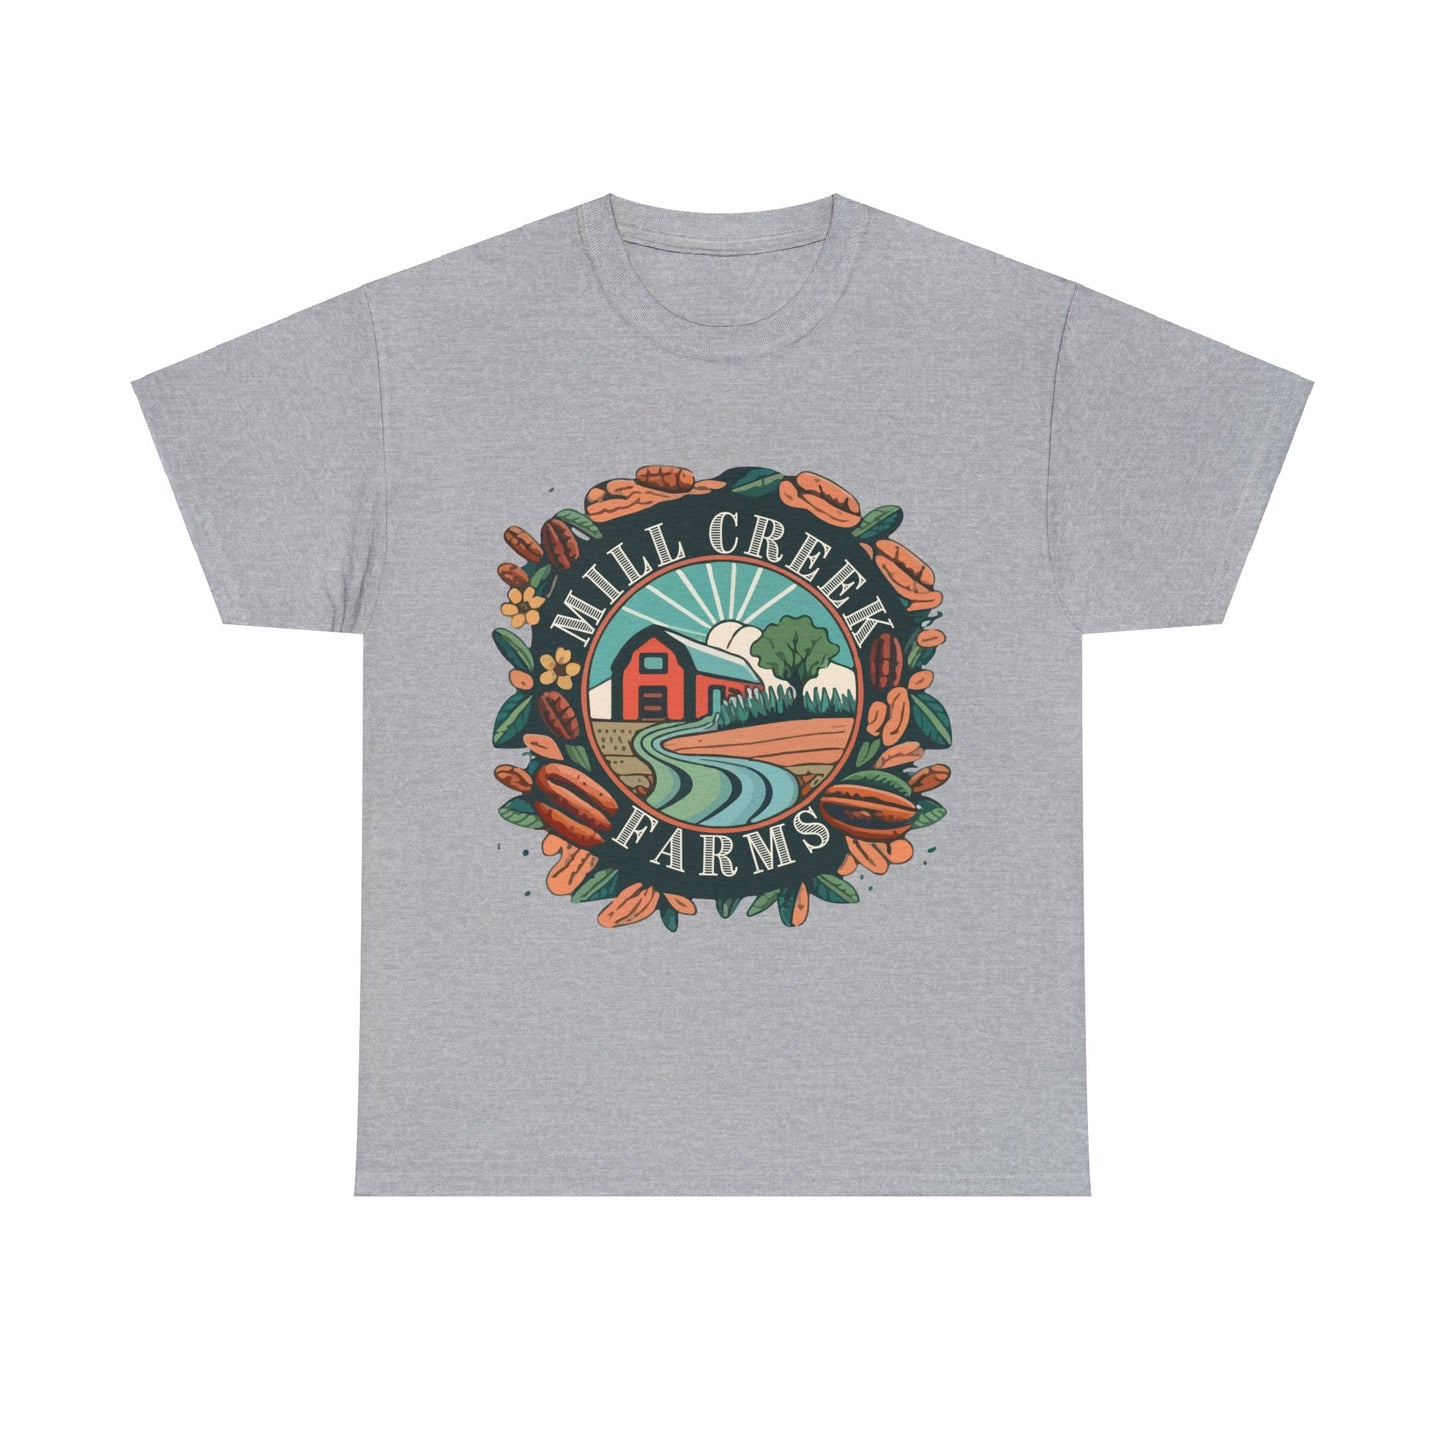 Mill Creek Farms Official Unisex Heavy Cotton Tee